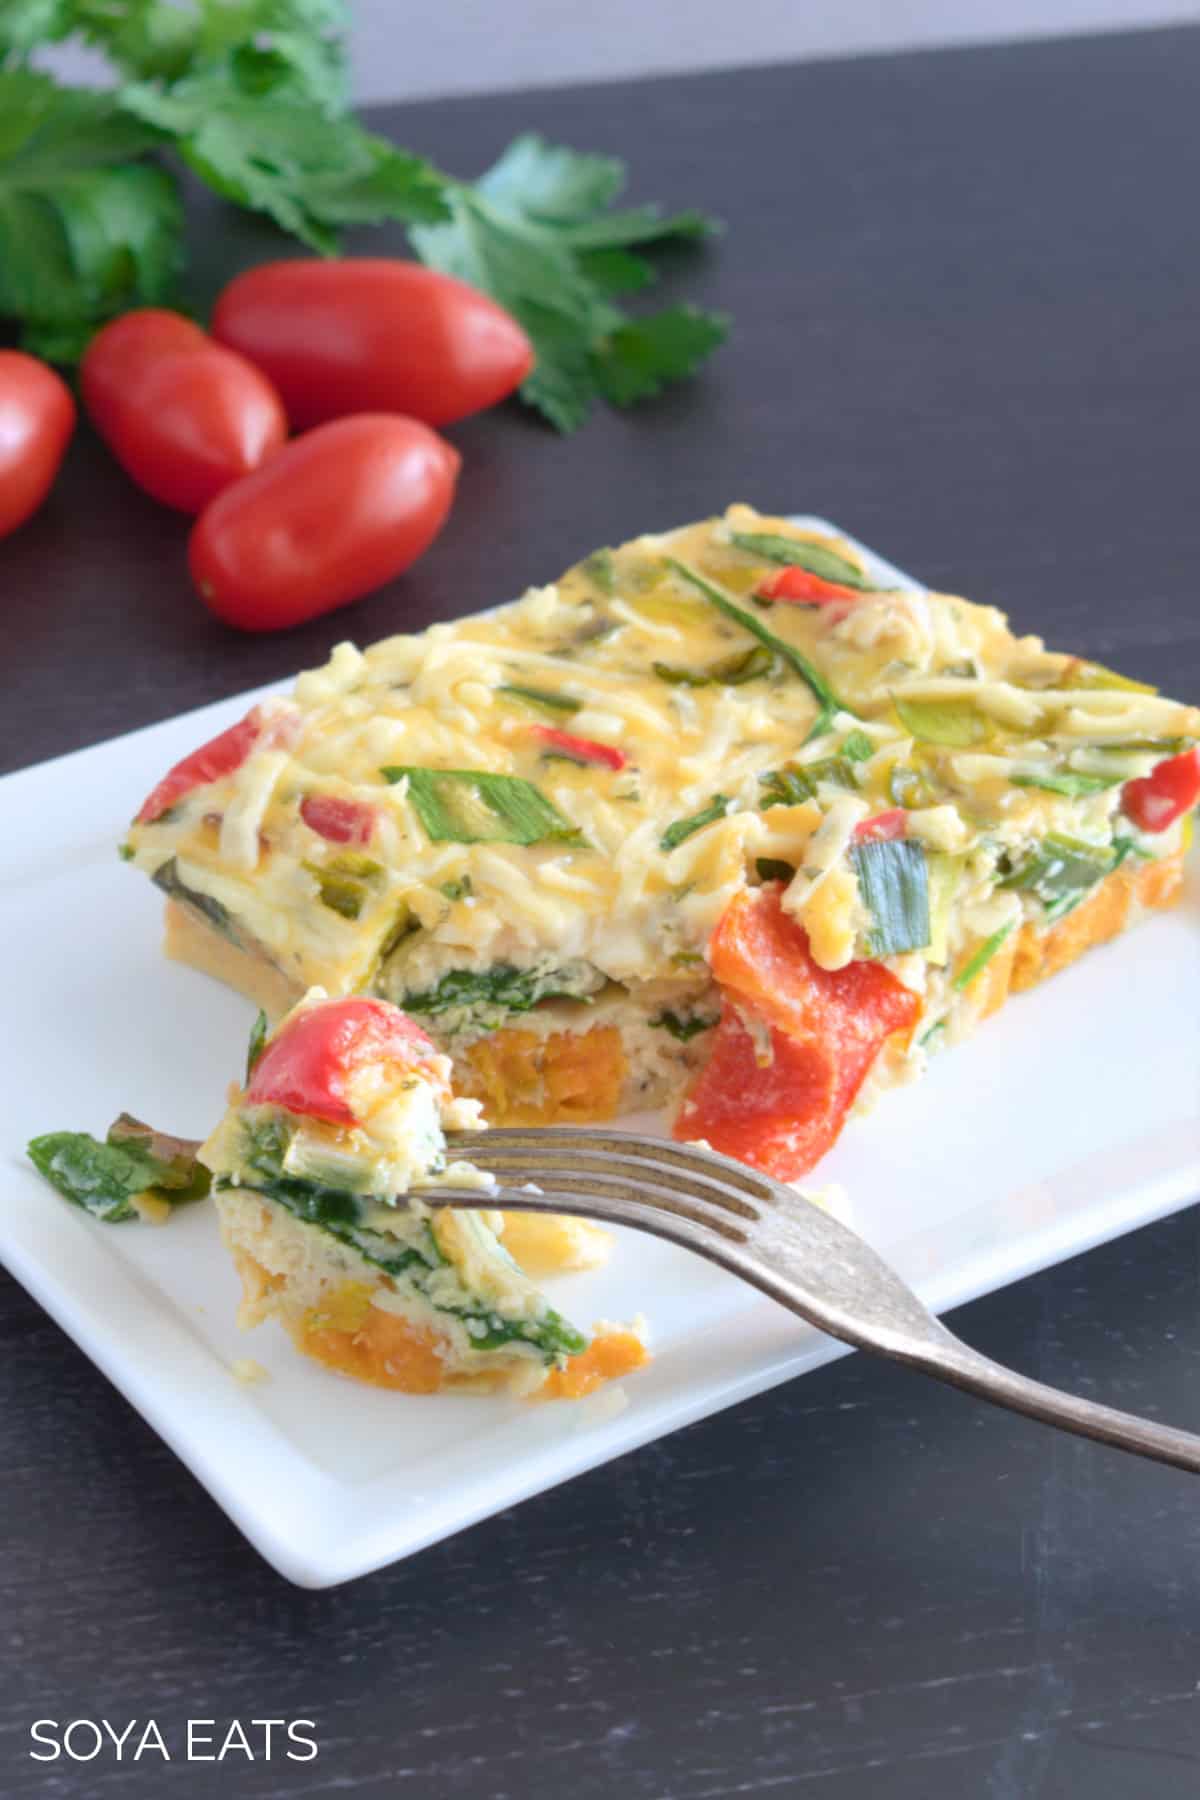 A slice of vegetable breakfast casserole with a fork on the plate.